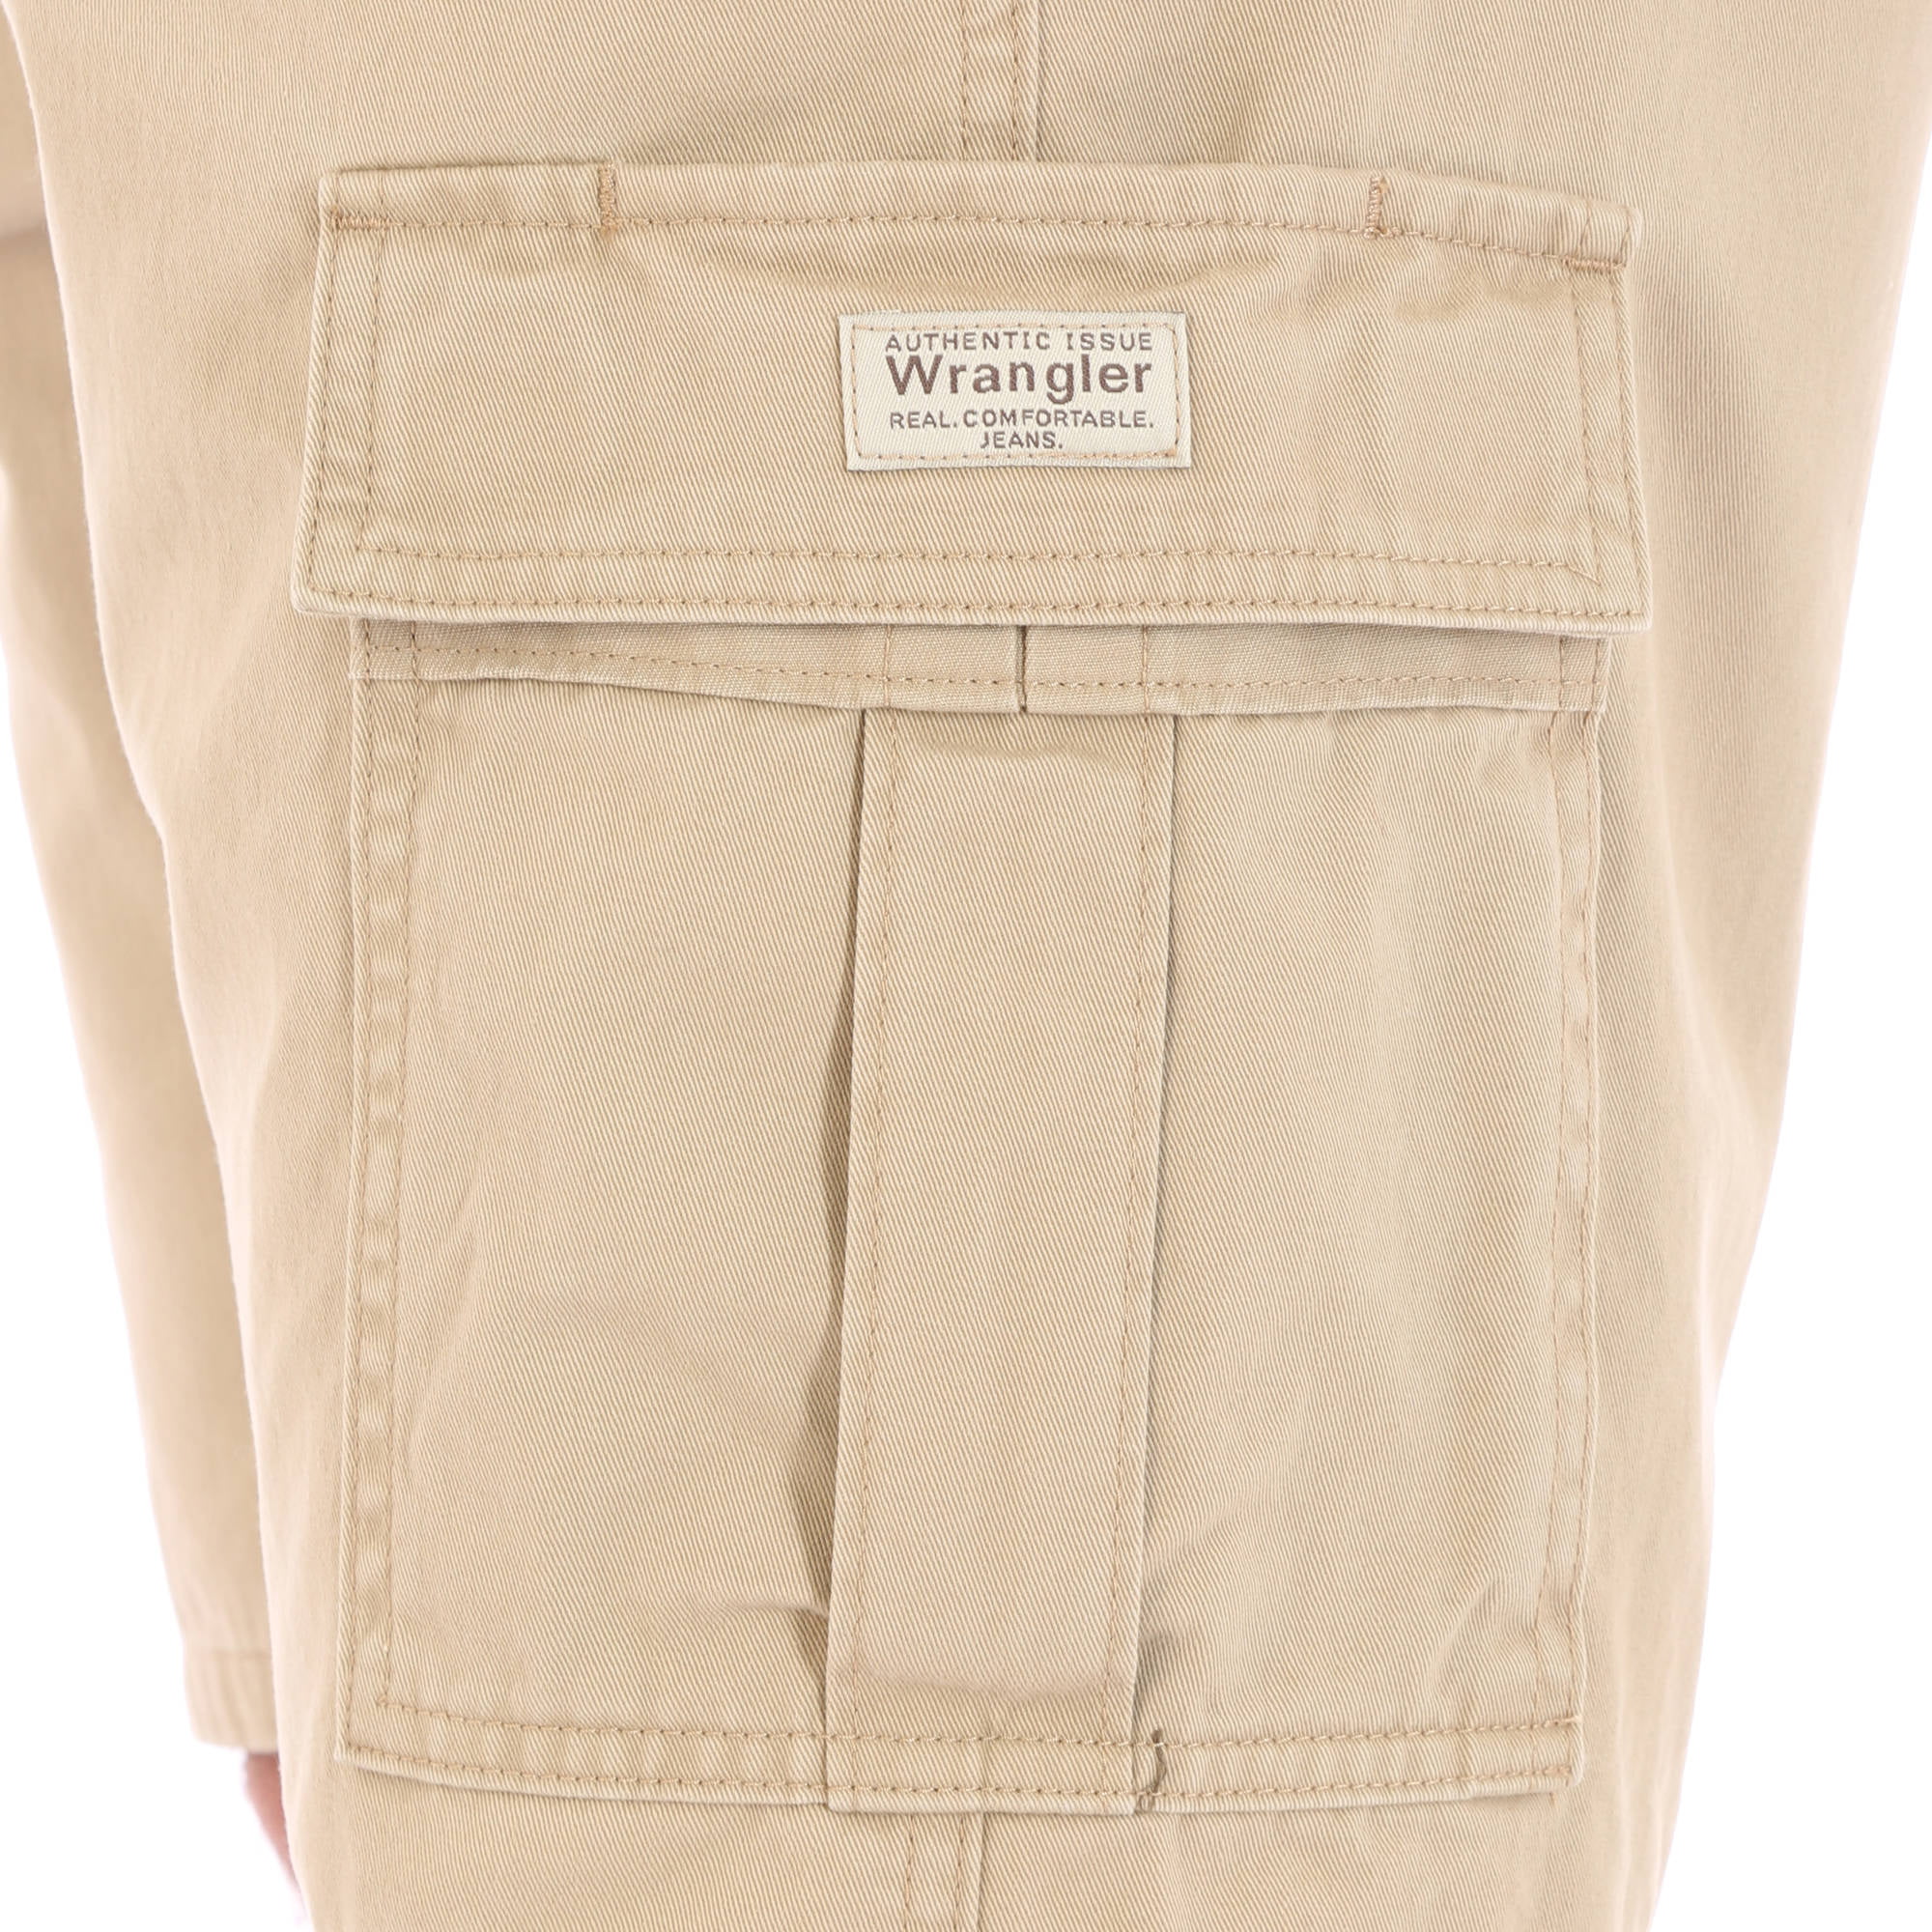 wrangler real comfortable jeans